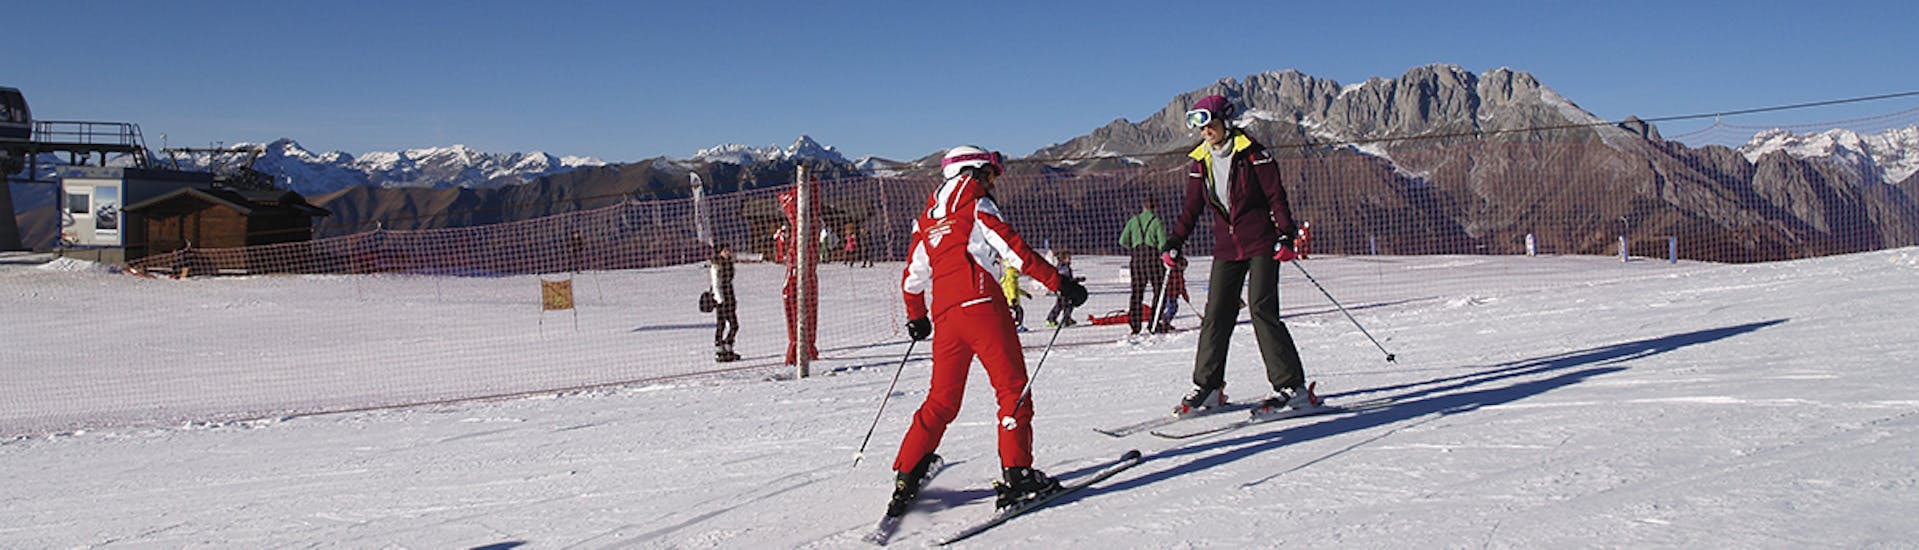 Participant taking part in one of the private ski lessons for adults of all levels.